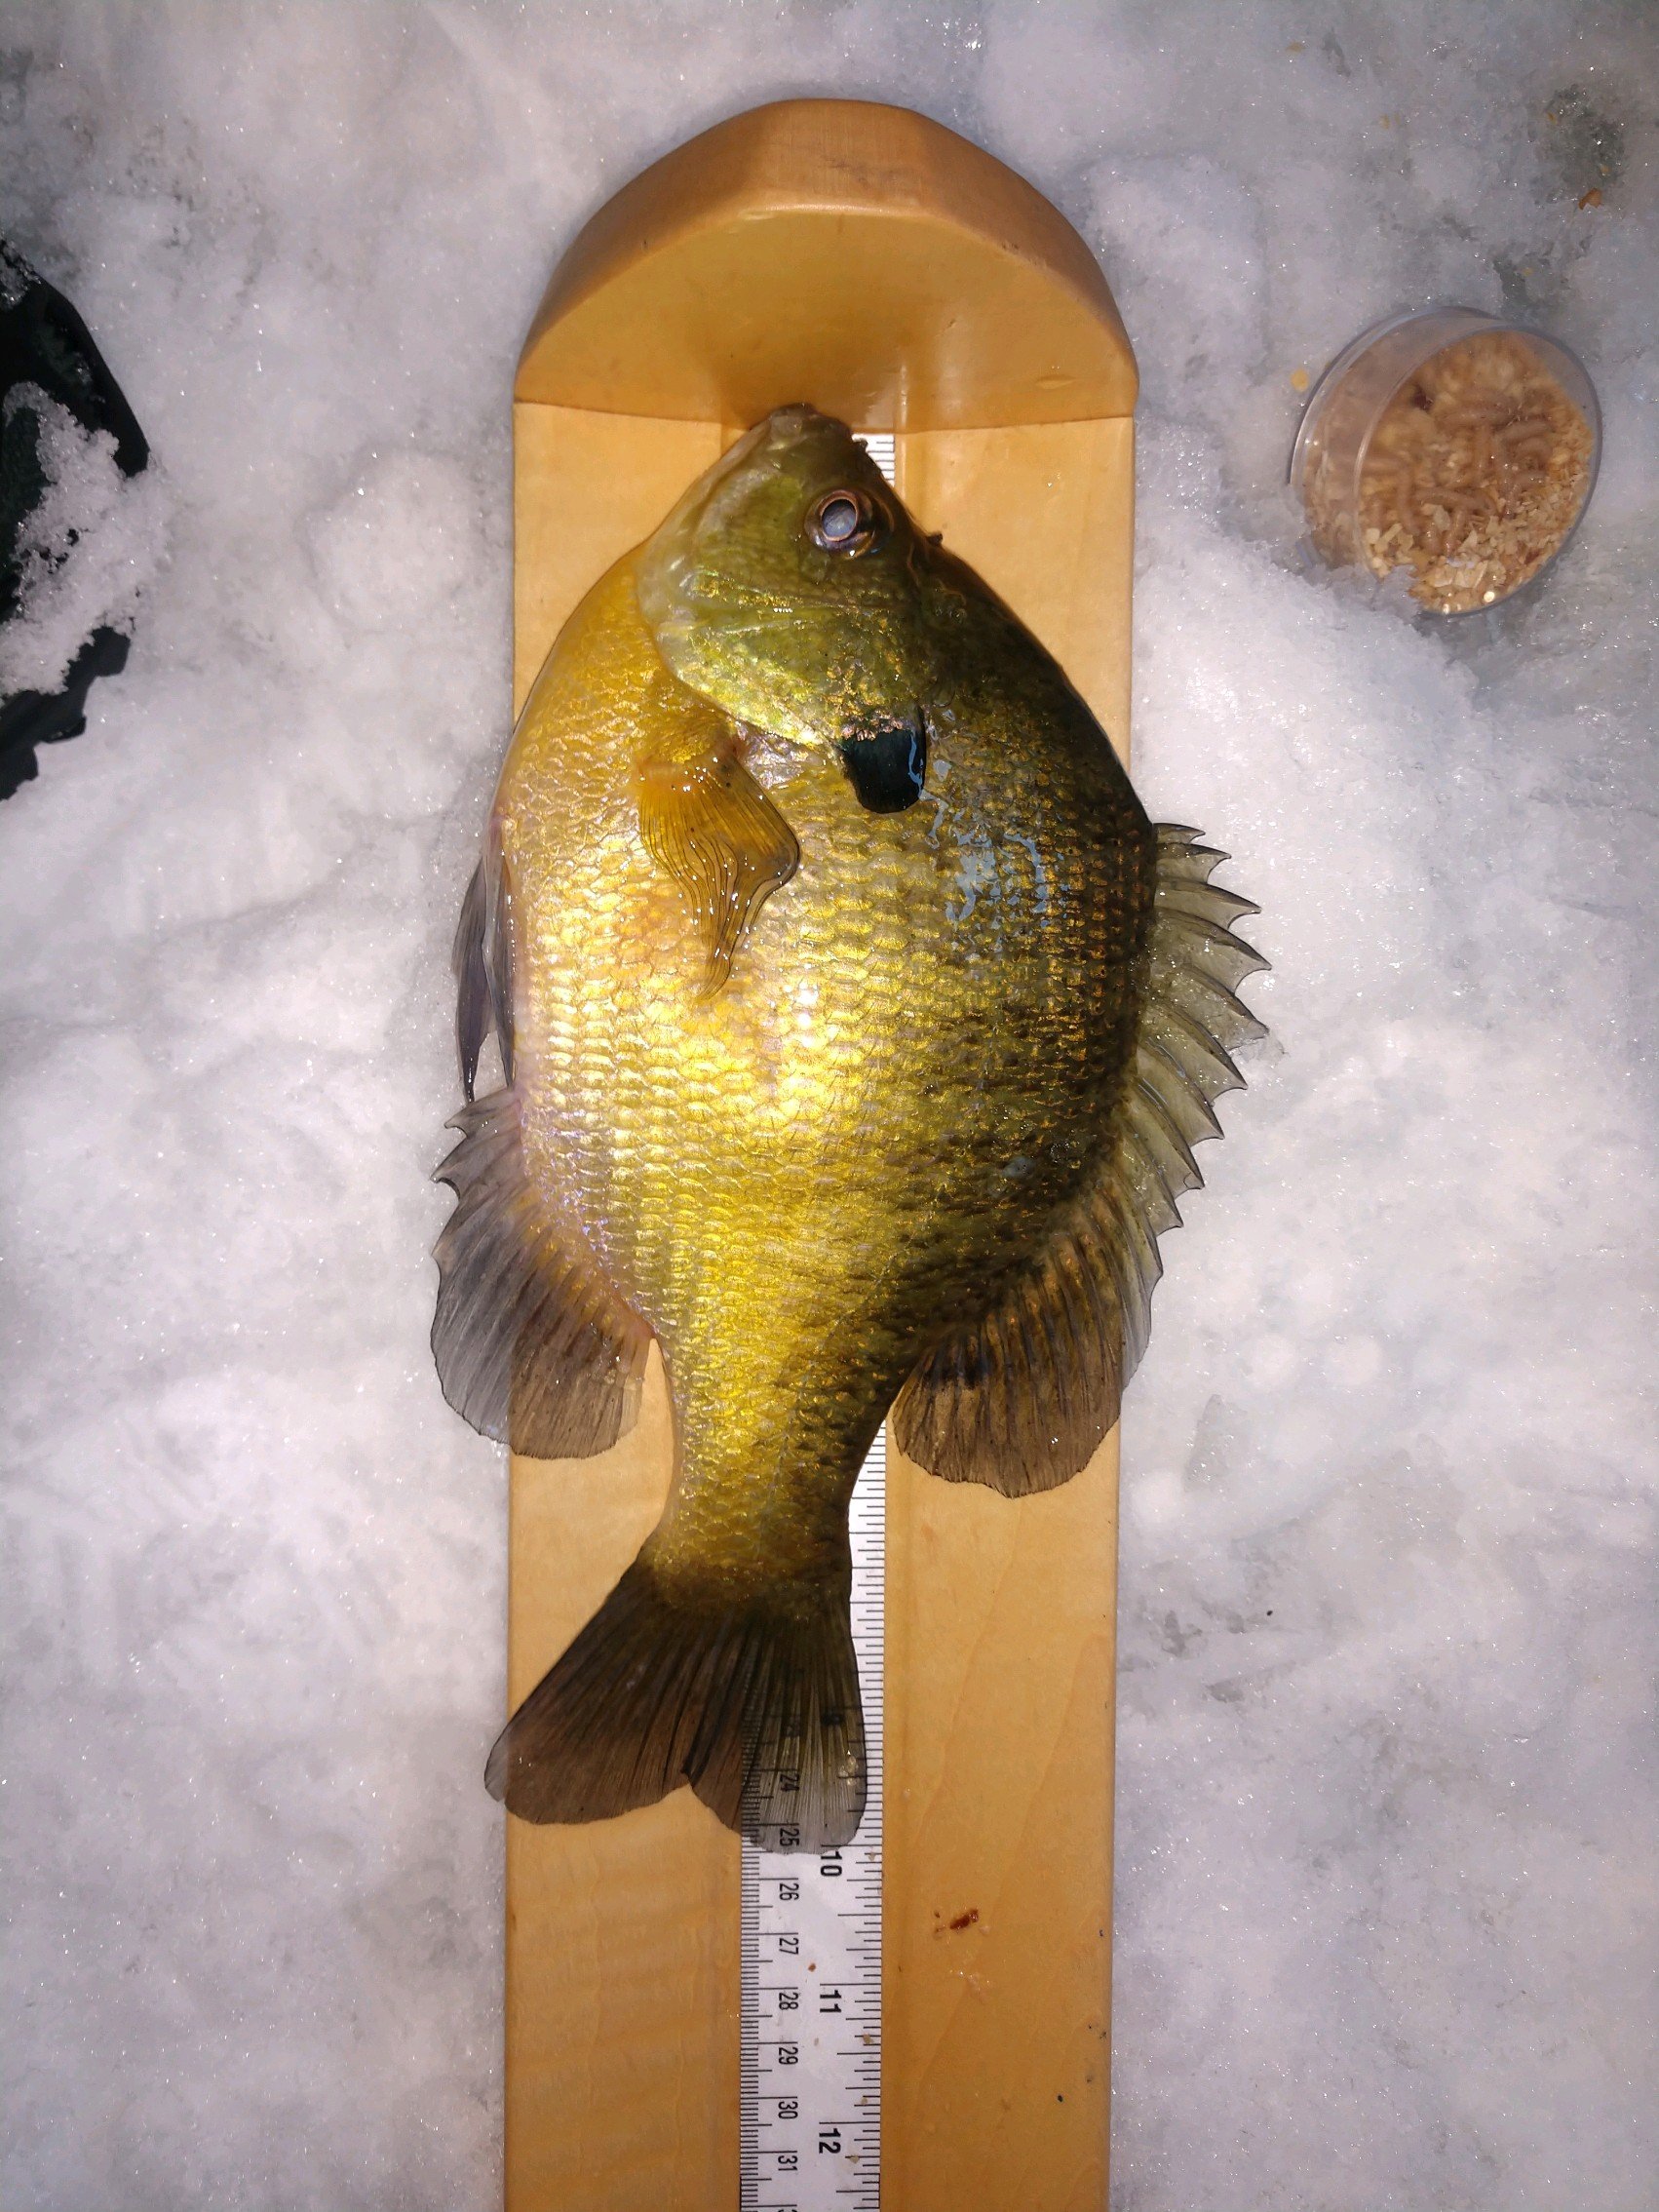 Looking for a new bump board. - Ice Fishing Forum - Ice Fishing